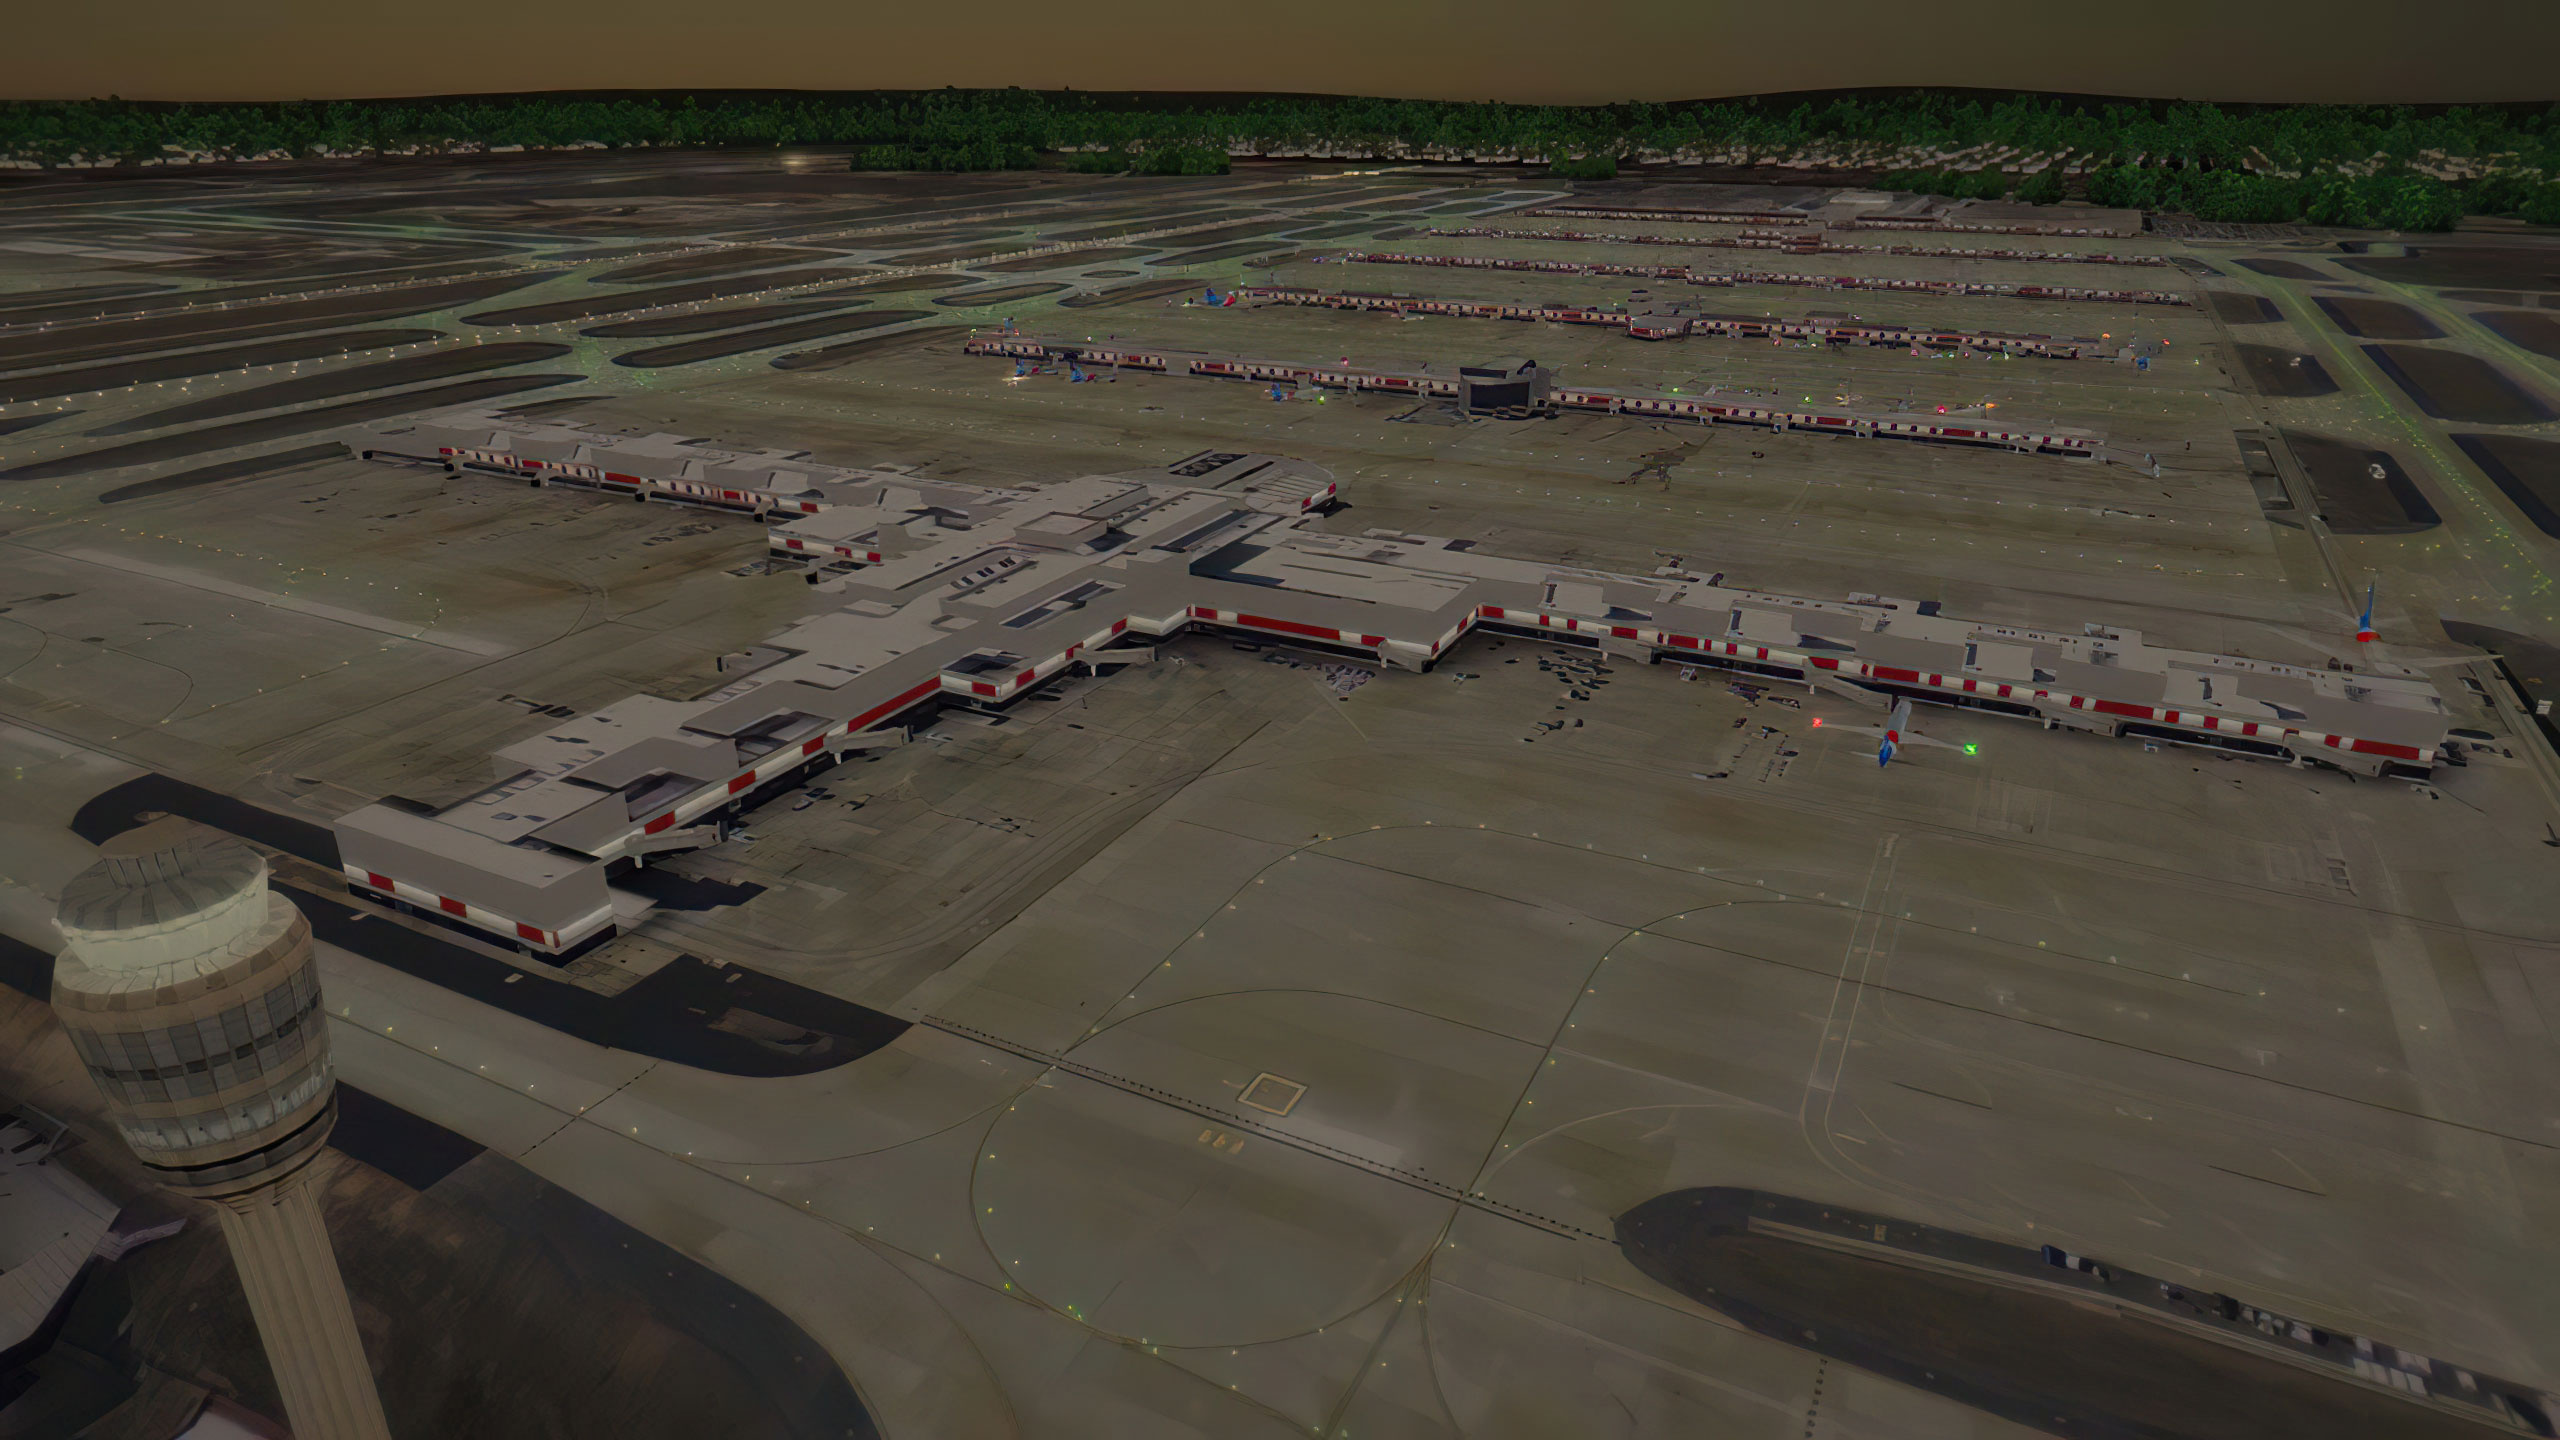 Hartsfield-Jackson Atlanta International Airport, Tower 3D expansion, Feelthere simulation game, Aviation enthusiasts, 2560x1440 HD Desktop